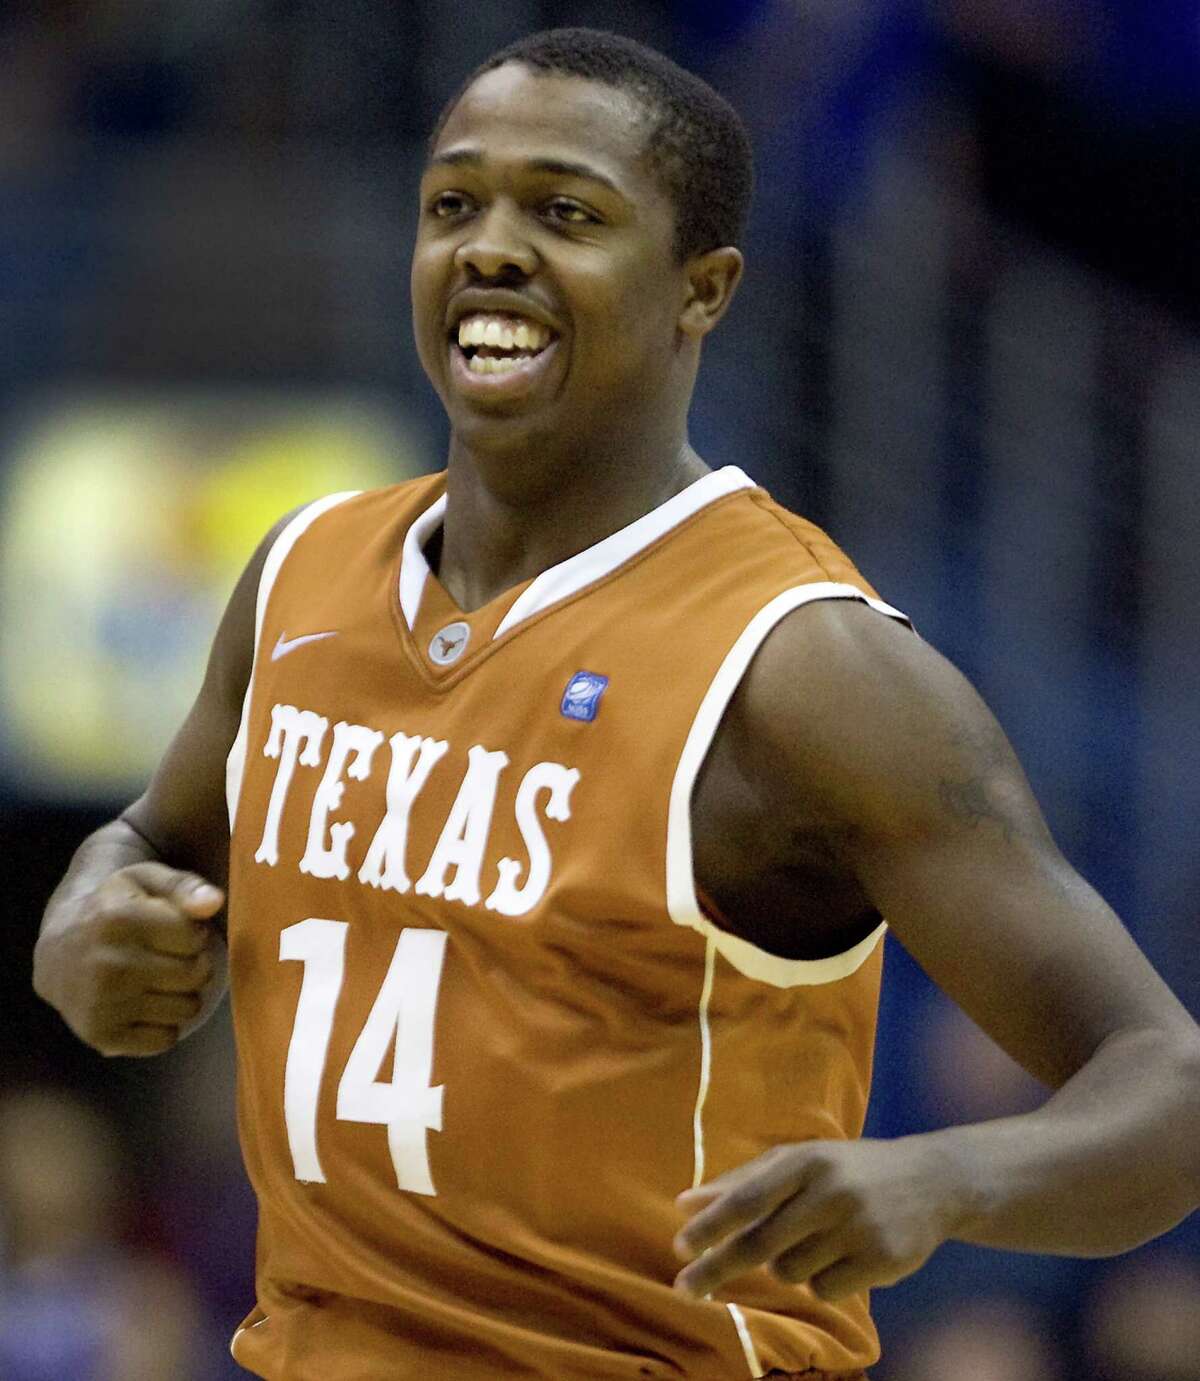 After converting a 3-point shot during Texas' second-half comeback, J'Covan Brown enjoys the moment against Kansas at Allen Fieldhouse in Lawrence, Kansas, on Saturday, January 22, 2011. Brown scored 17 of his game-high 23 points during a 74-63 win that saw Texas rally from 12-point halftime deficit. (Rich Sugg/Kansas City Star/MCT)